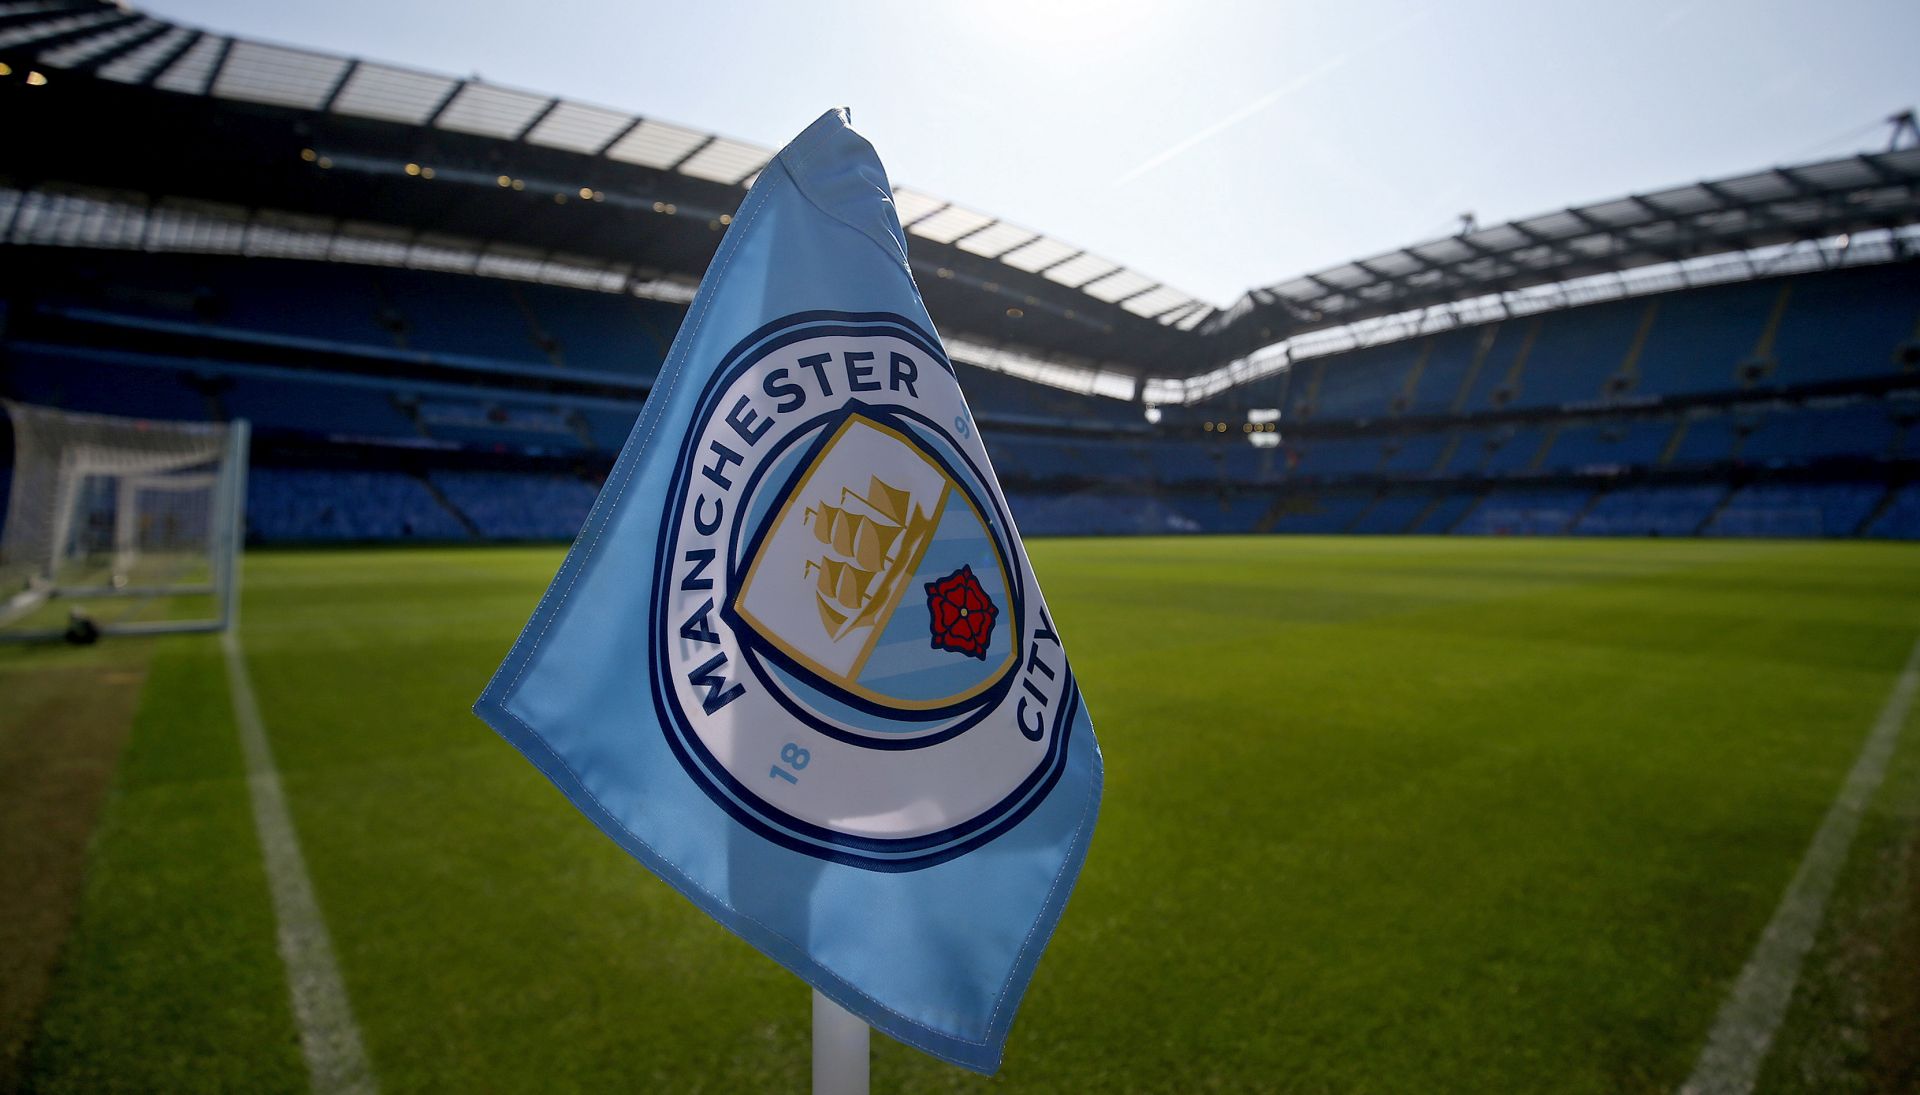 epa08543103 (FILE) - The corner flag is backdropped by a general view of the Etihad stadium ahead of the English Premier League soccer match between Manchester City and Tottenham Hotspur at the Etihad Stadium in Manchester, Britain, 20 April 2019 (reissued 13 July 2020). The international Court of Arbitration for Sport (CAS) on 13 July 2020 lifted the two-year Champions League ban for English Premier League side Manchester City. Manchester City was banned by the UEFA from the Champions League for the two seasons for having broken financial fair play rules.  EPA/Nigel Roddis EDITORIAL USE ONLY. No use with unauthorized audio, video, data, fixture lists, club/league logos or 'live' services. Online in-match use limited to 120 images, no video emulation. No use in betting, games or single club/league/player publications. *** Local Caption *** 55137036